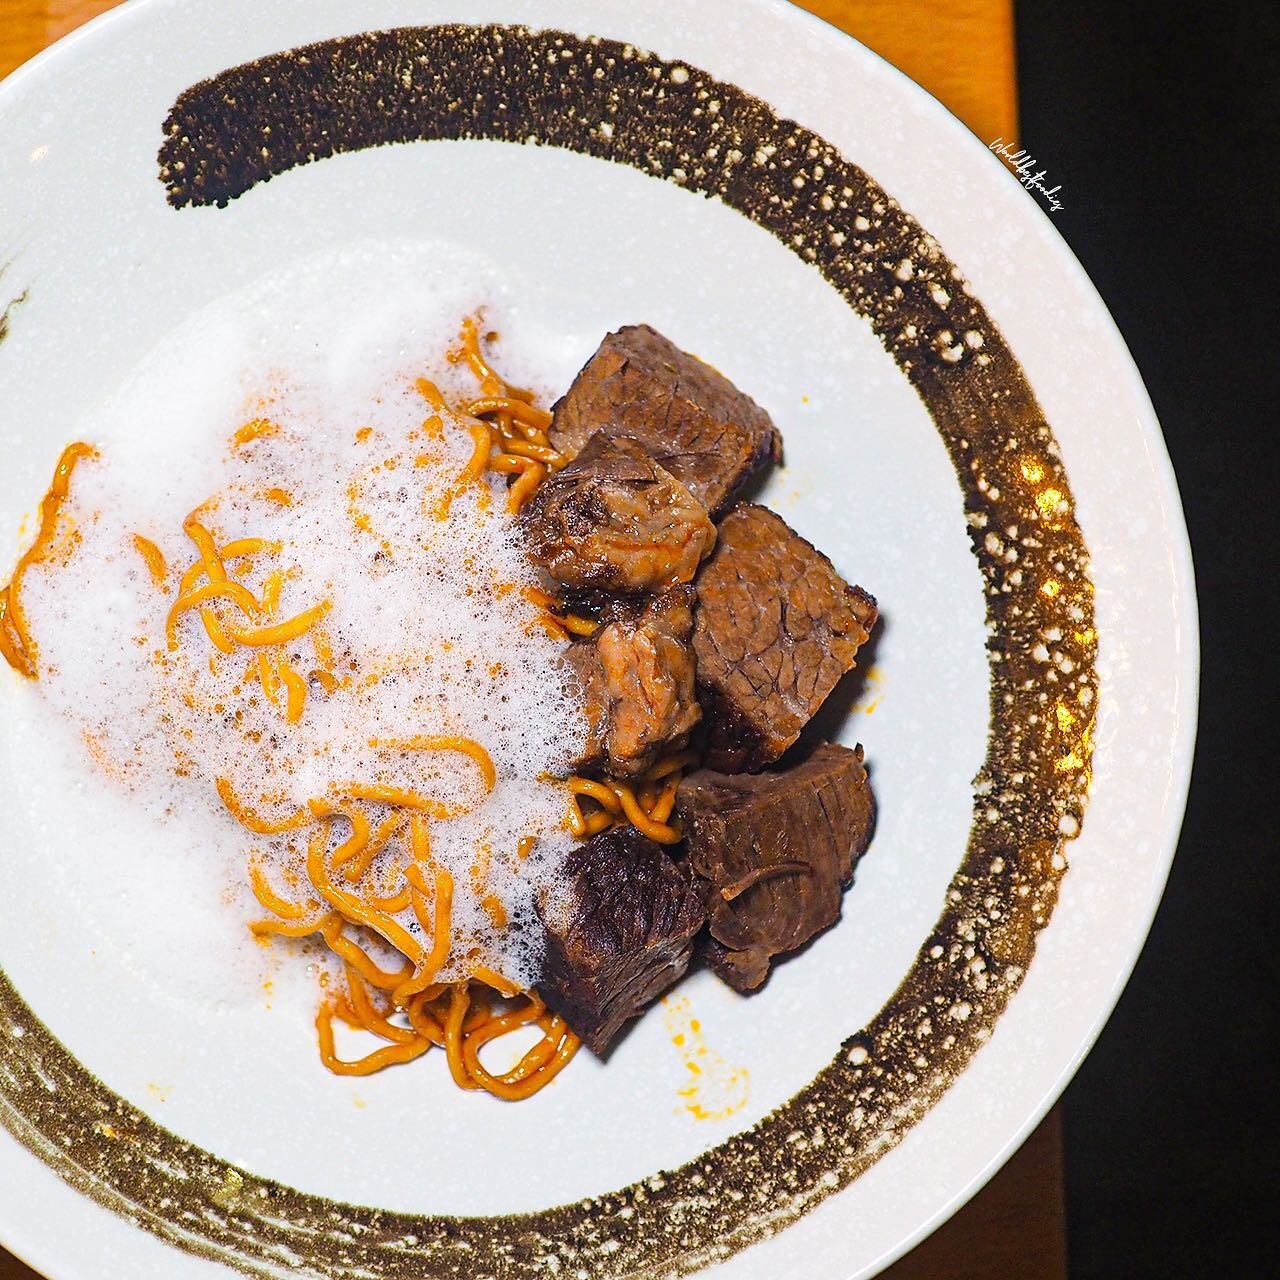 We visited @sichuanalley recently to try their latest menu, by Ex-Antoinette @chef_pang .

Some of our highlights from this series of Sichuan Noodles &amp; Specialty Desserts, include the following:

1. French Red Wine Wagyu Brisket with Truffle Foam